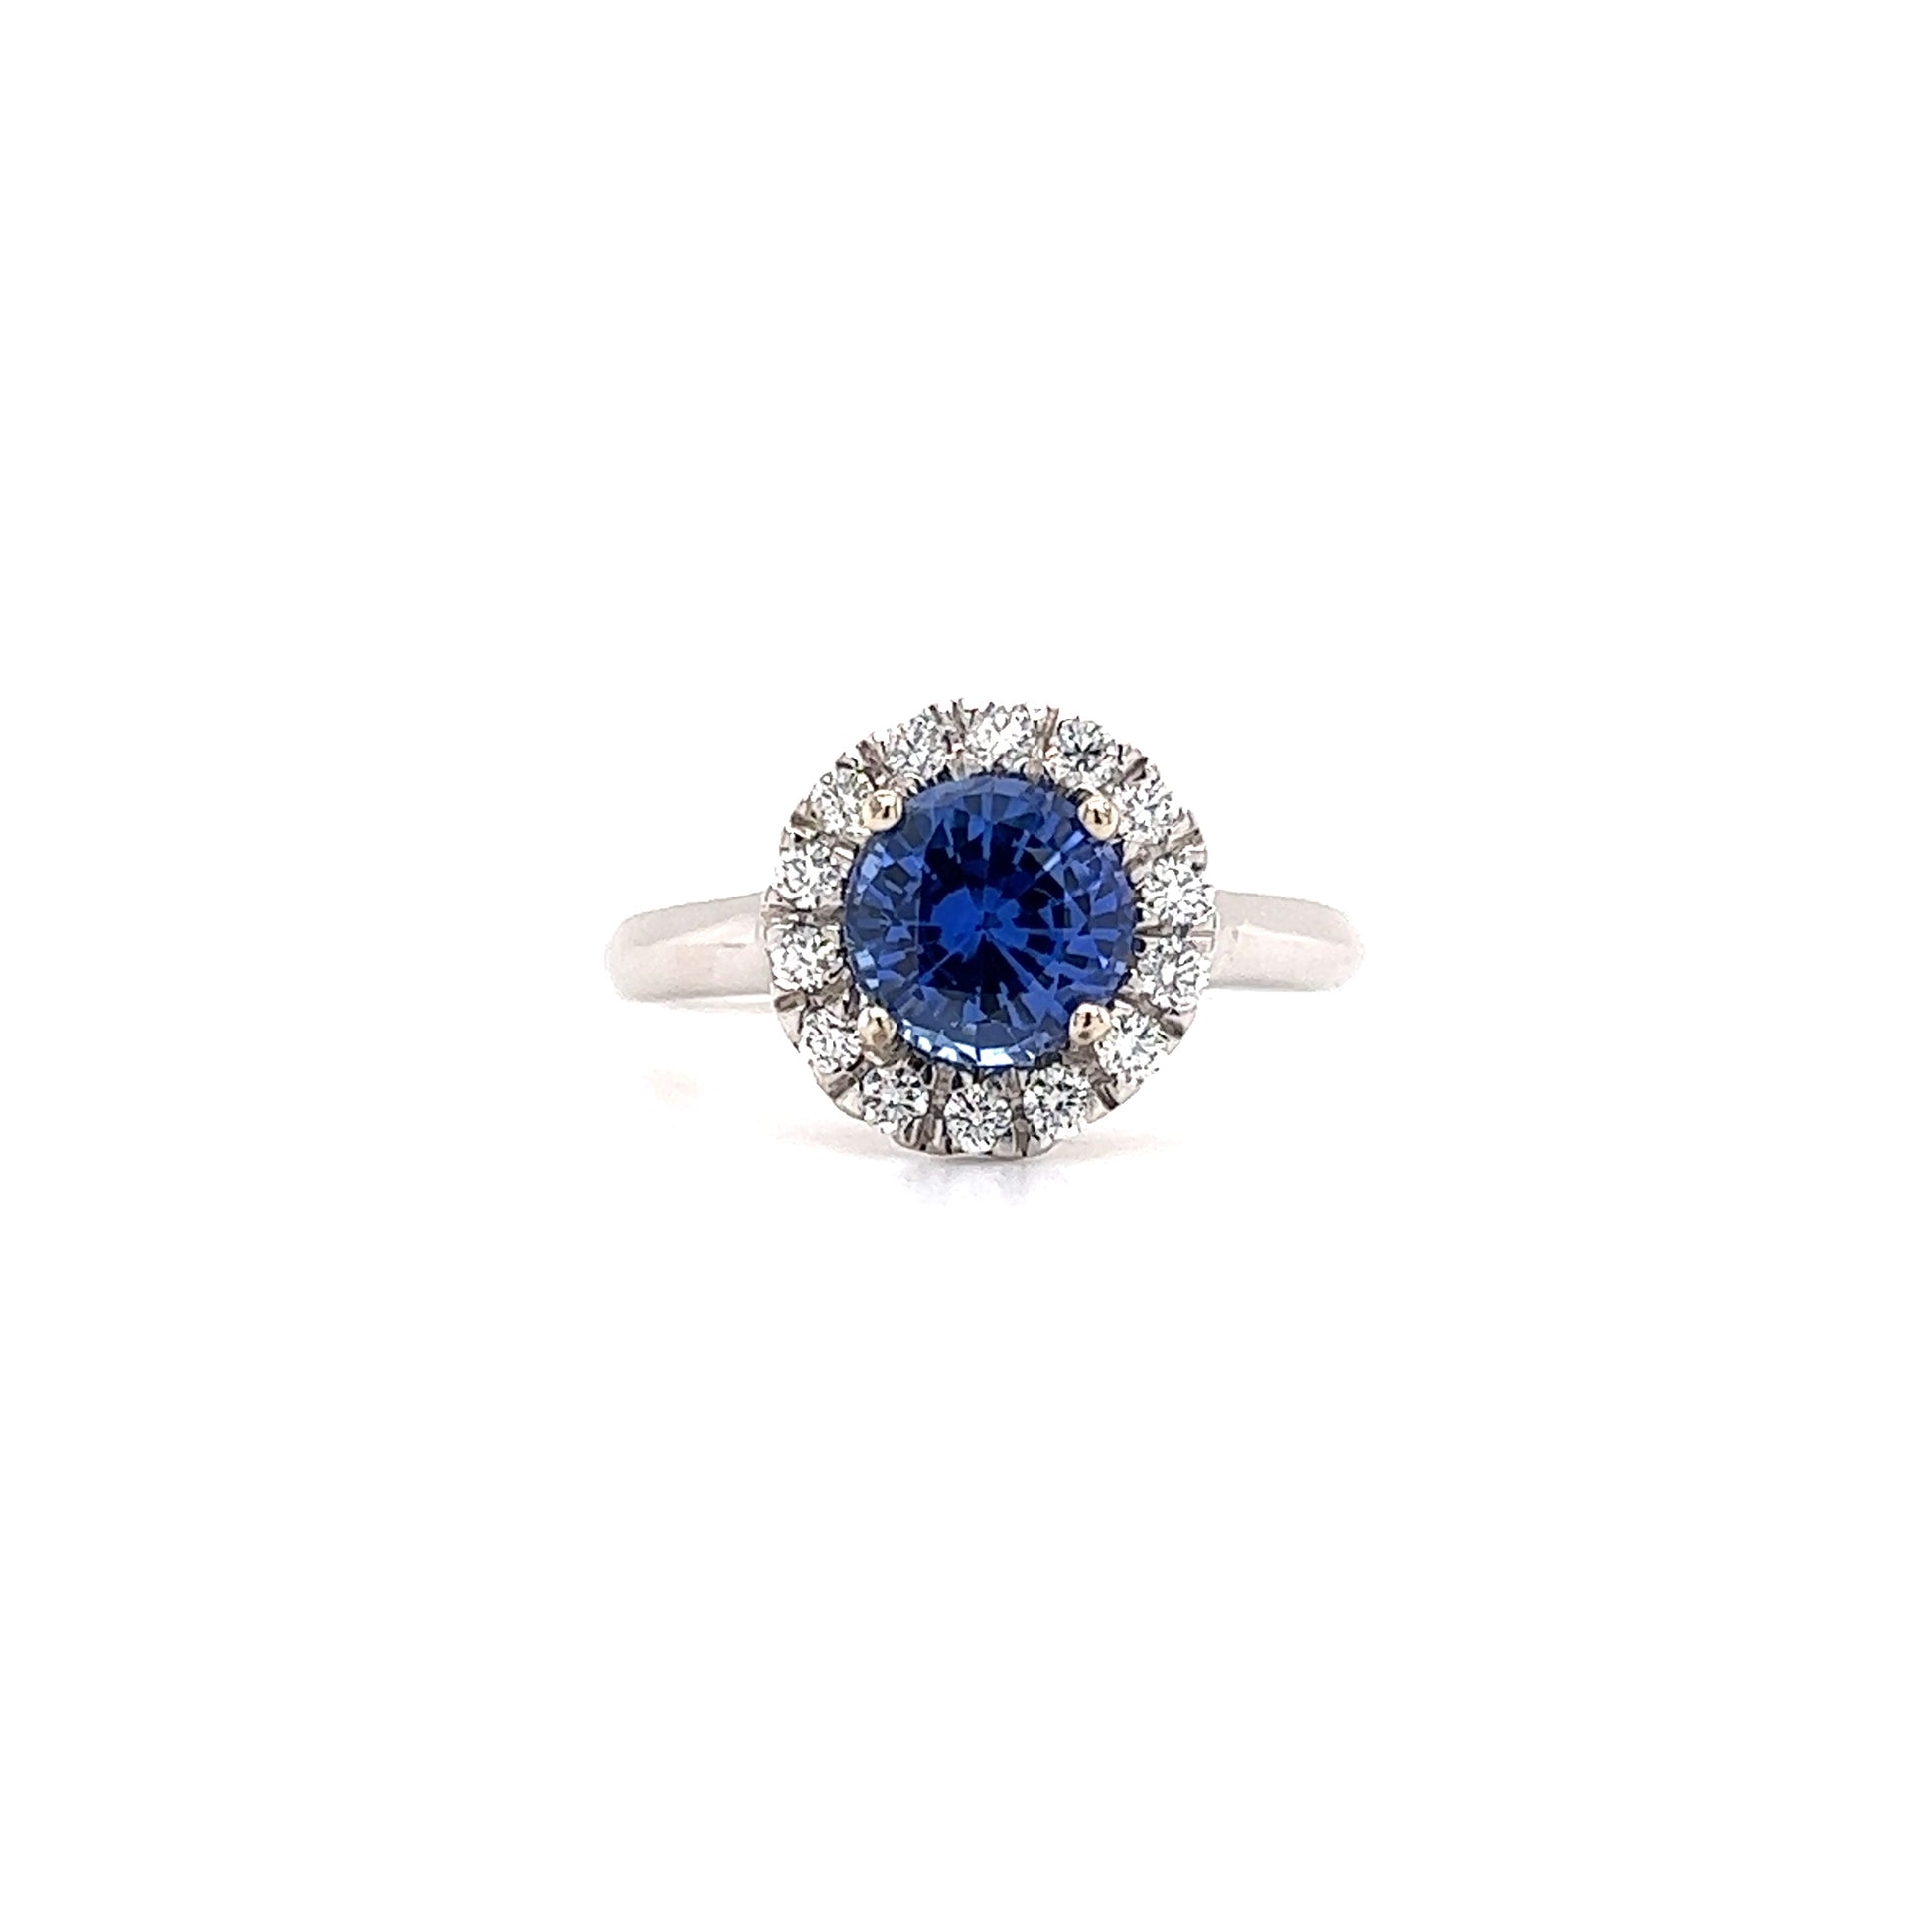 Round Sapphire Ring with Diamond Halo in 14K White Gold Front View